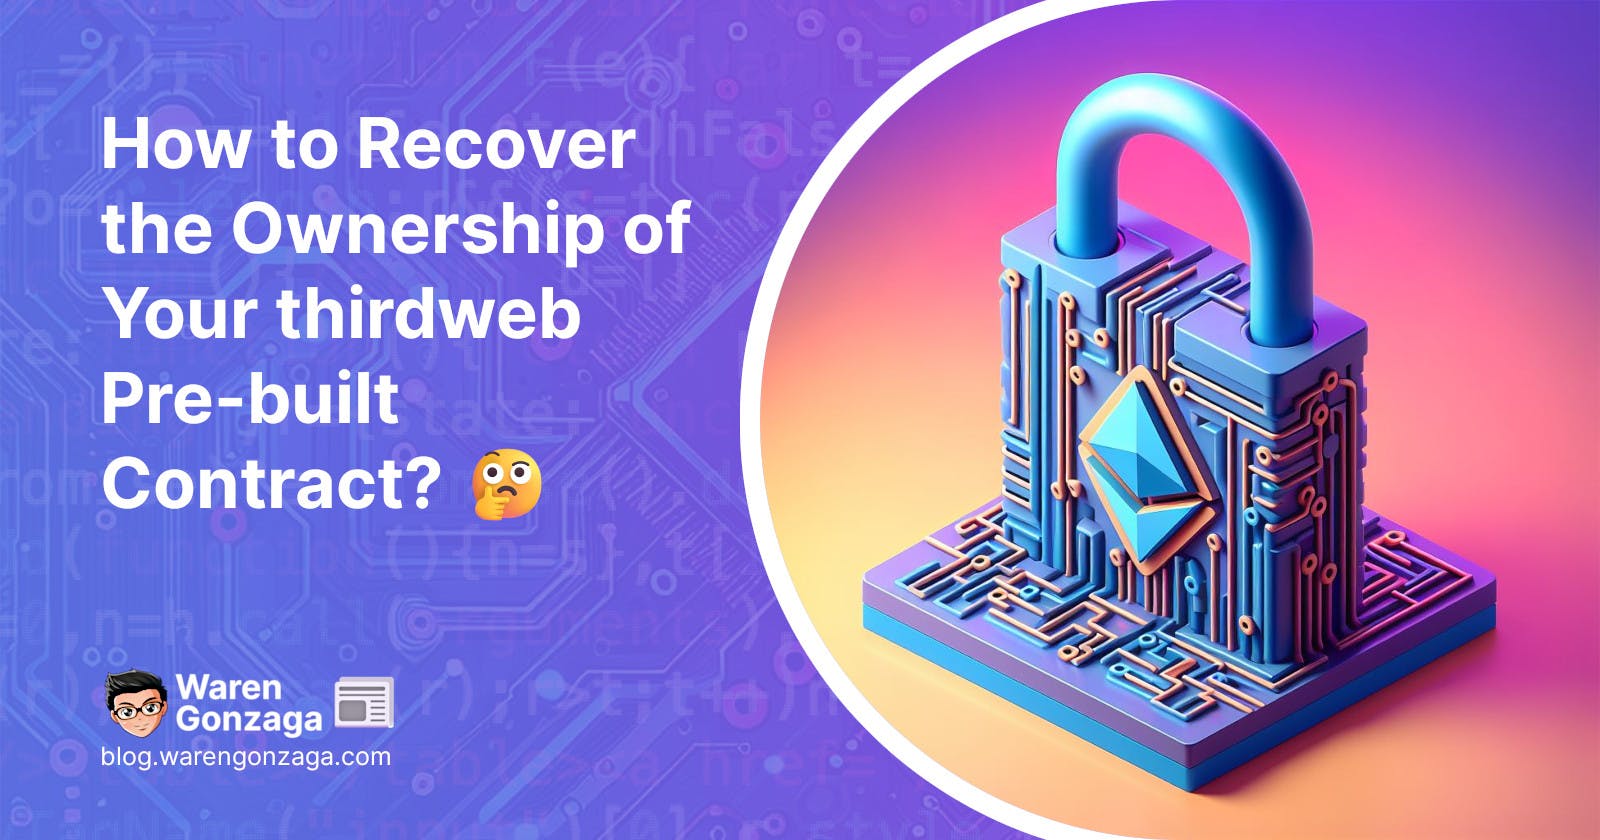 How to Recover the Ownership of Your thirdweb Pre-built Contract?